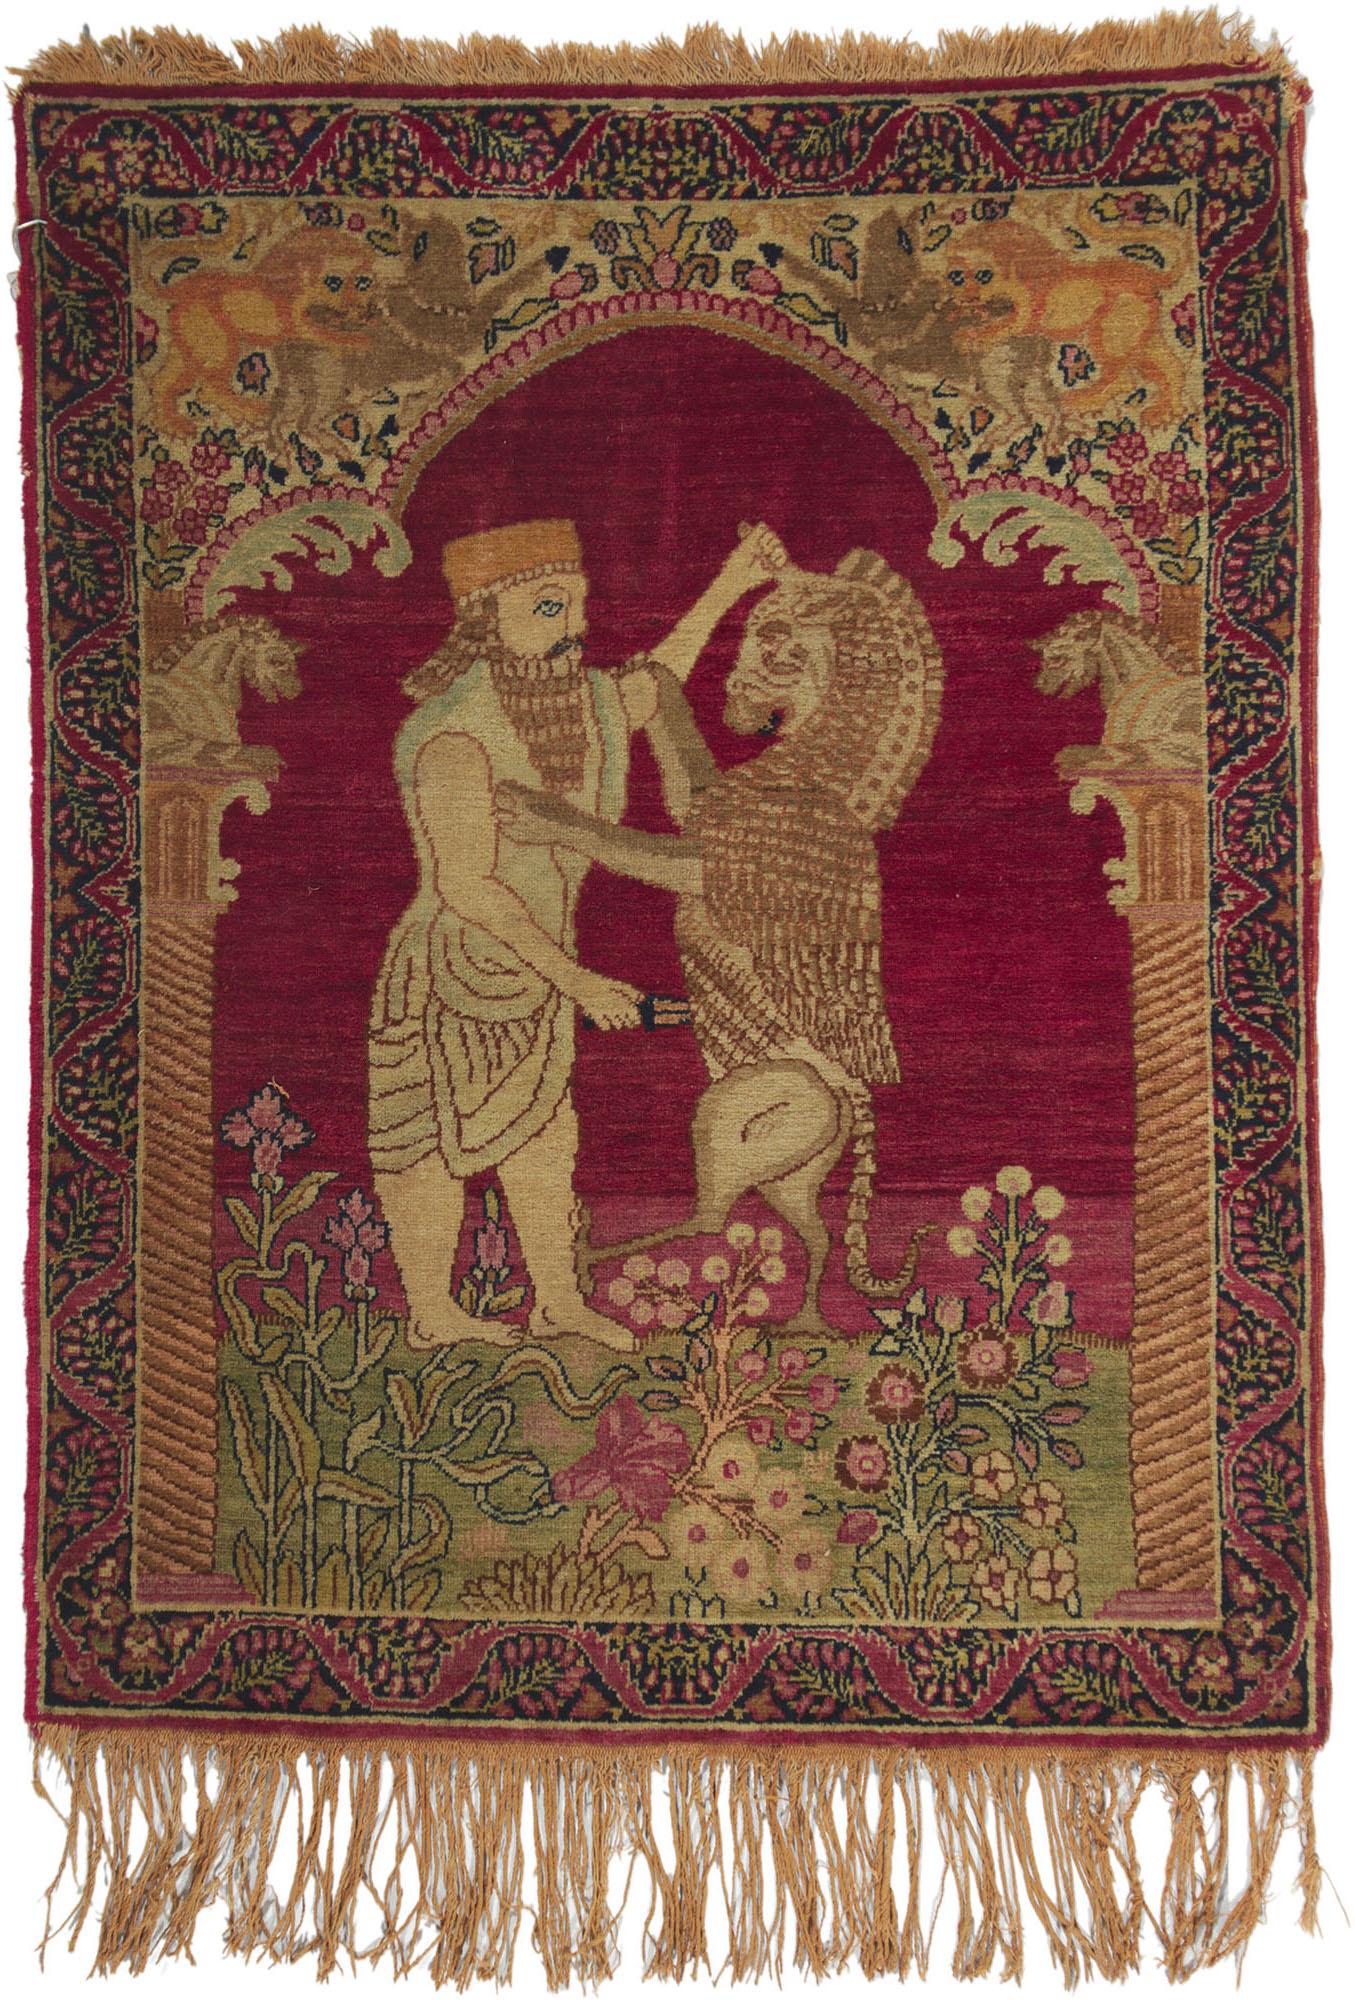 Antique Kerman Pictorial Rug Lion & King Darius Achaemenid Mythological Tapestry In Distressed Condition For Sale In Dallas, TX